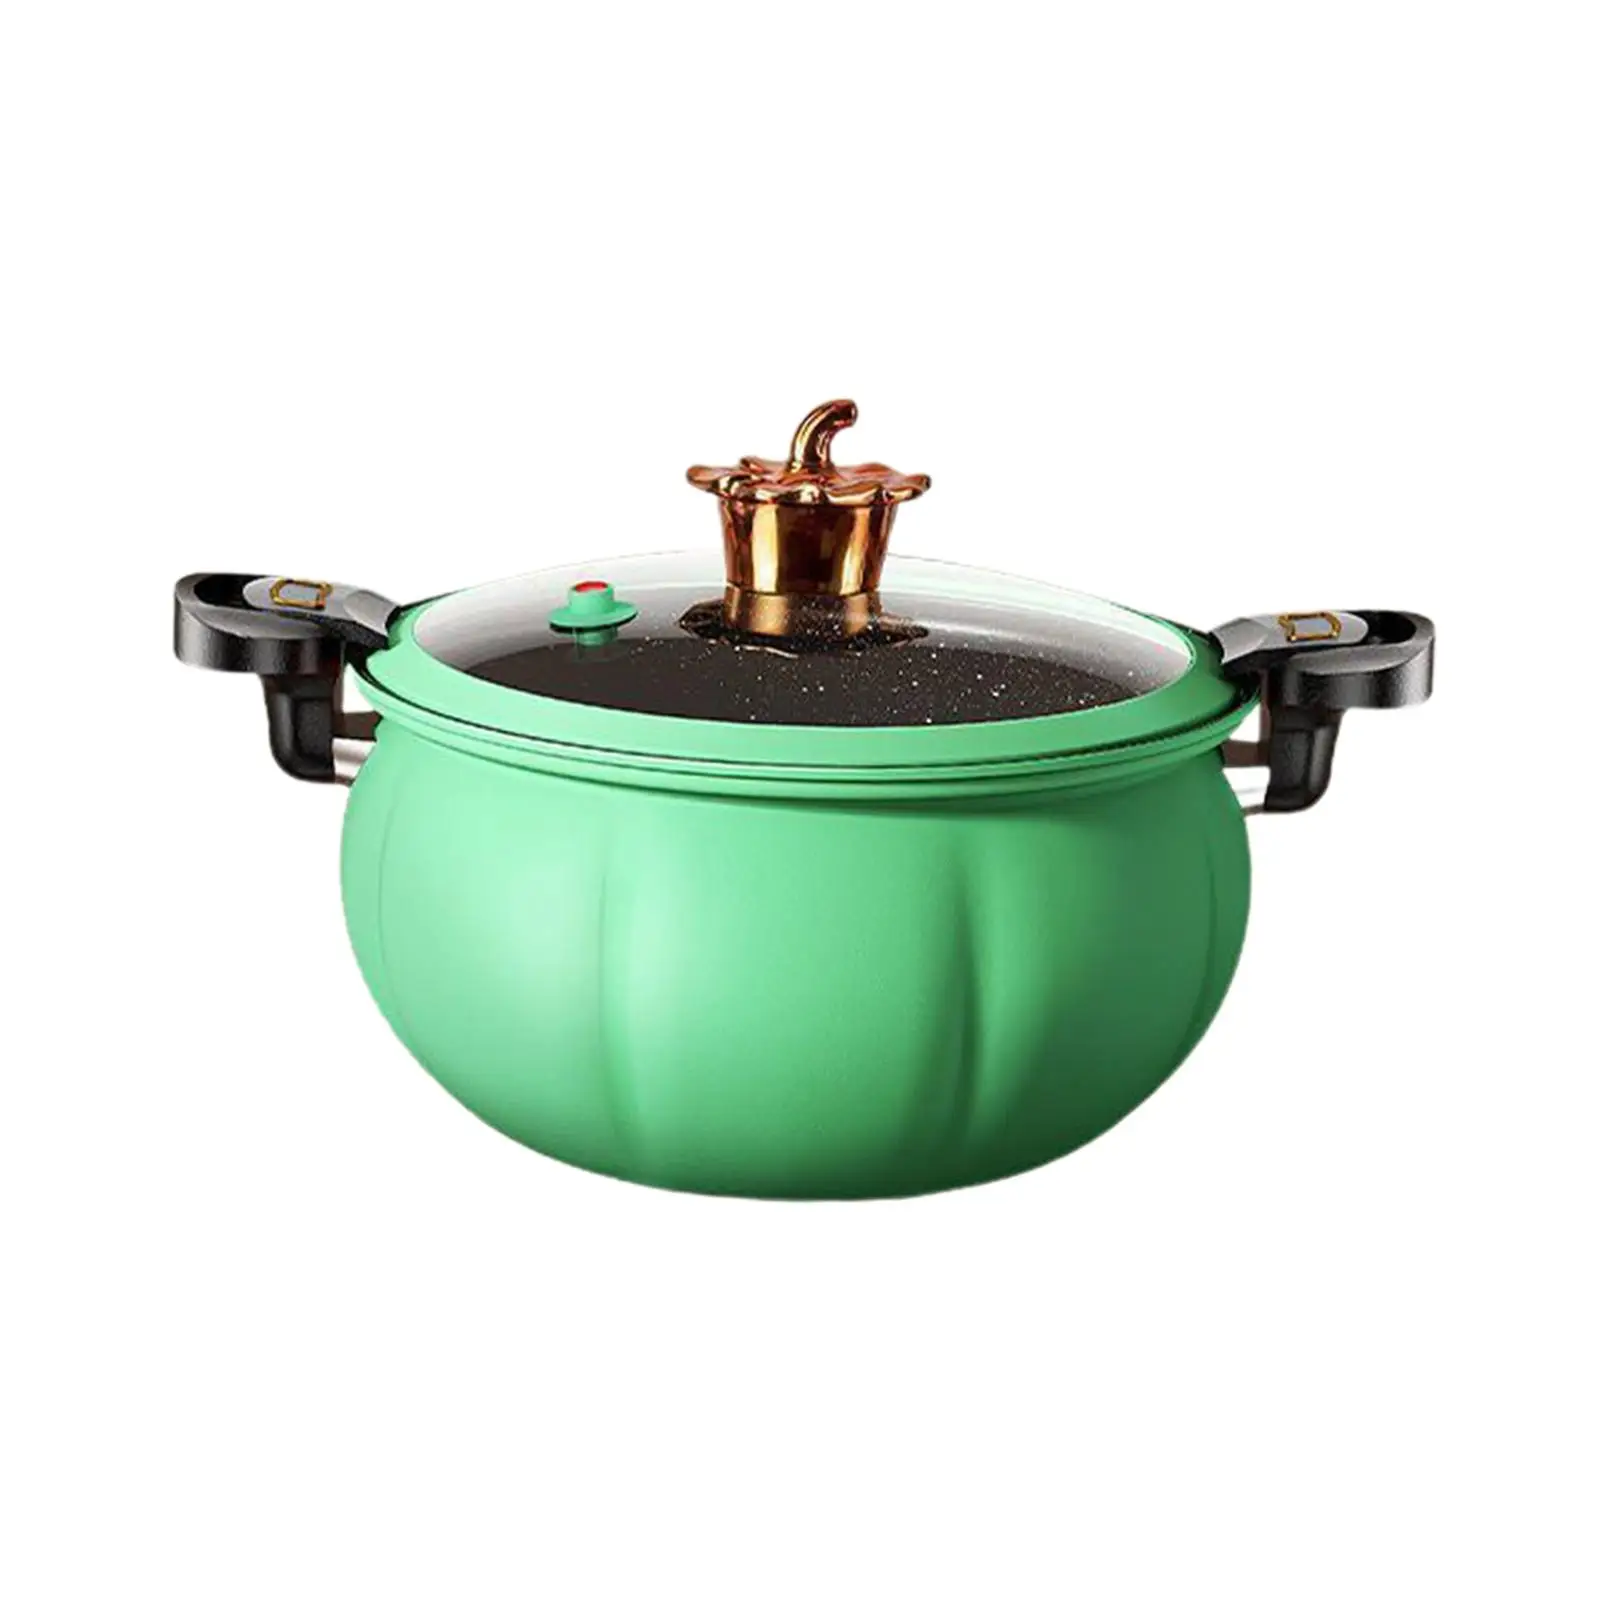 Cast Iron Rice Cooking Steamer Cookware Slow Cooker Pressure Stew Pot for Open Fire Picnics Outdoor Camping Parties